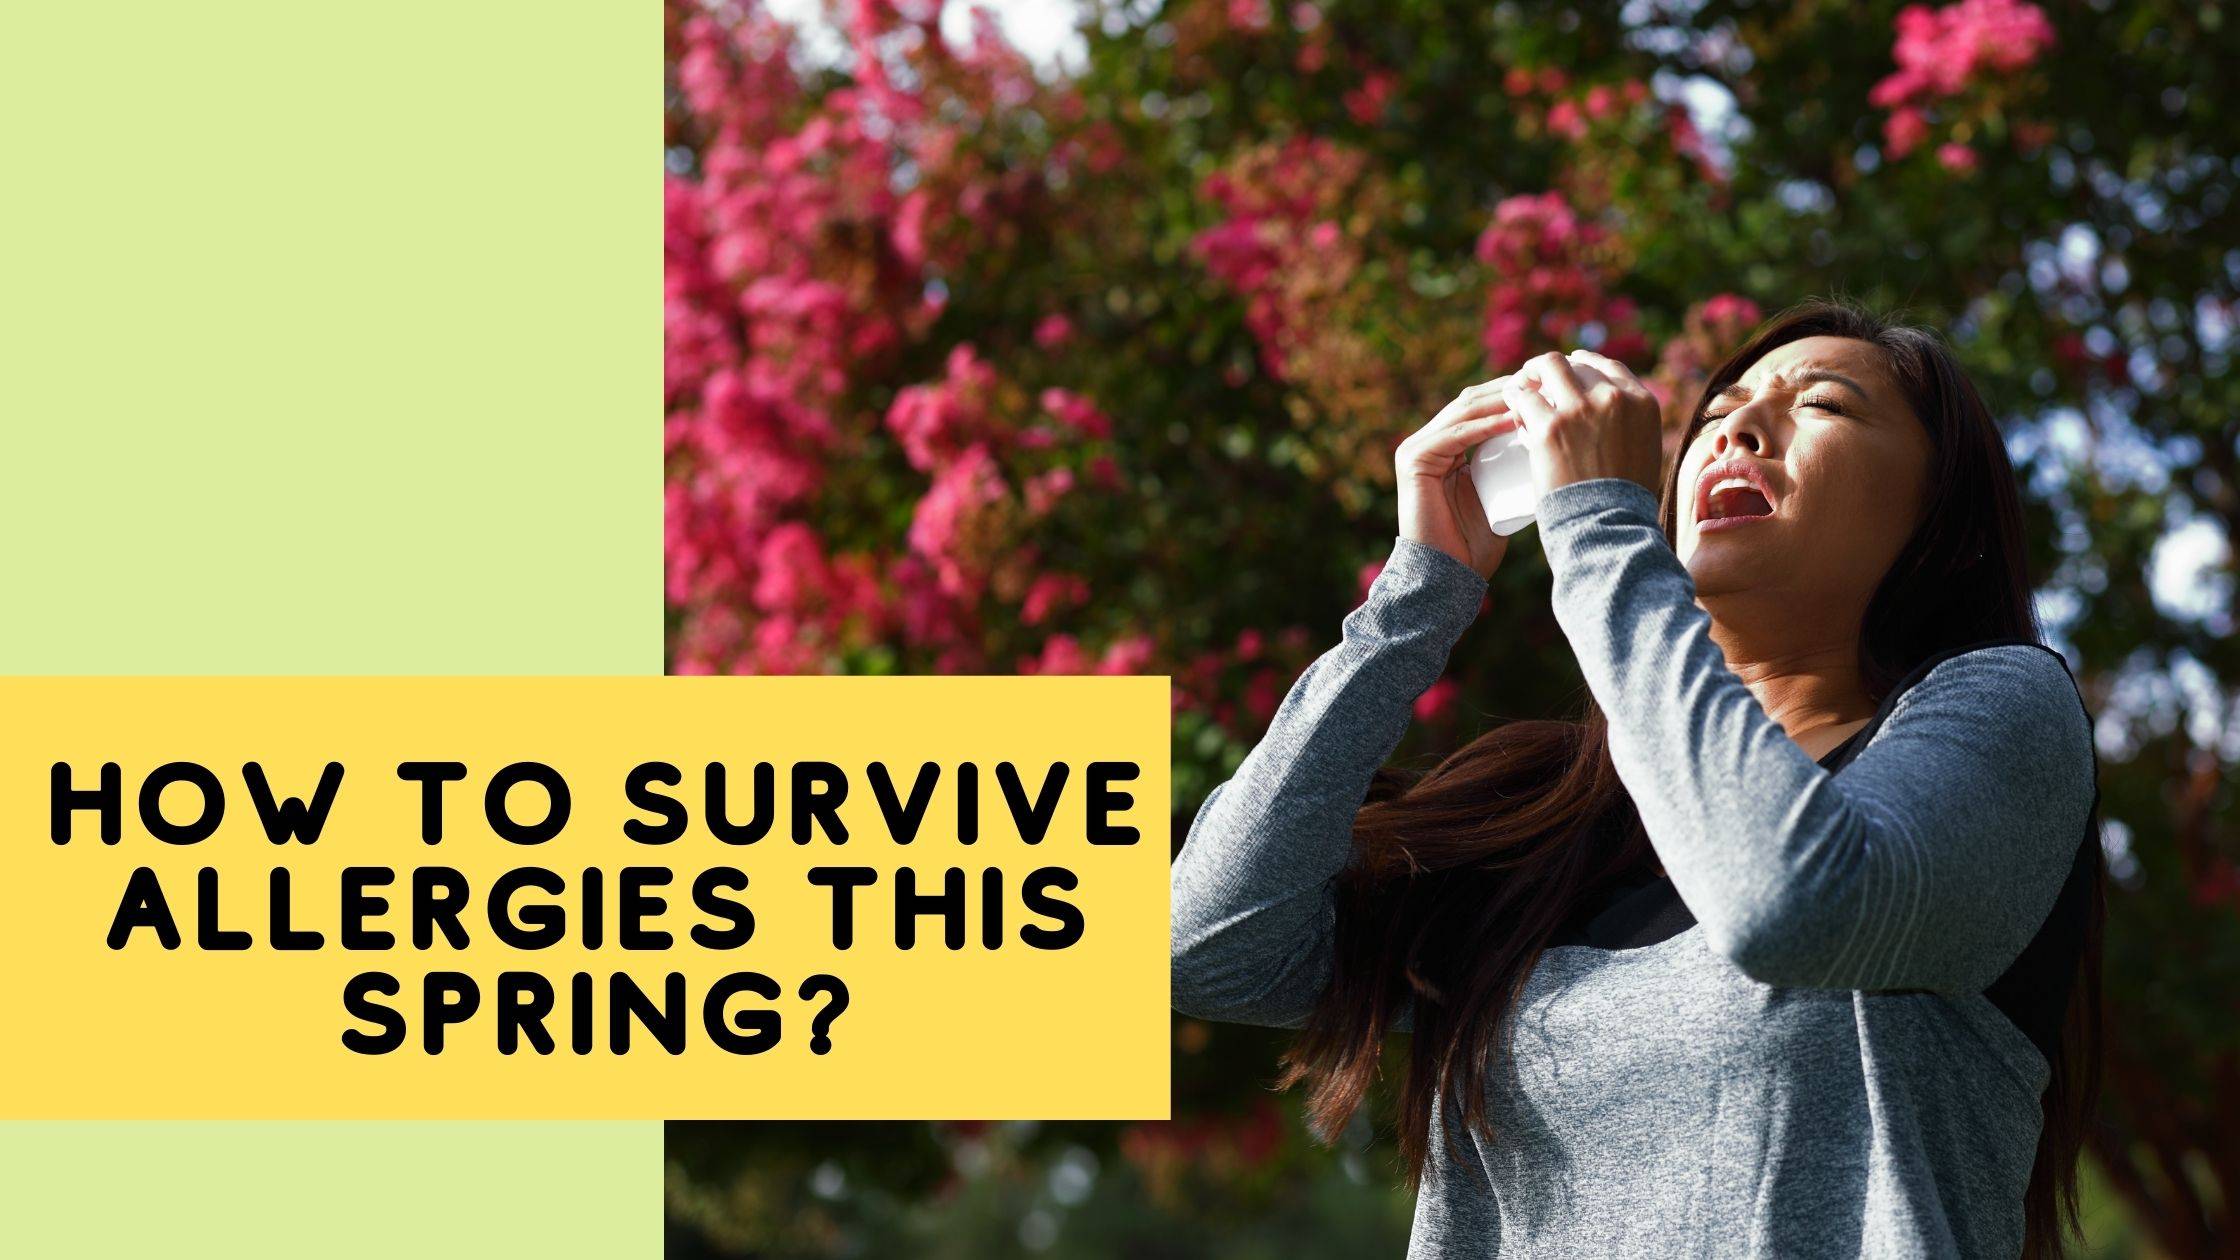 How to survive allergies this spring?